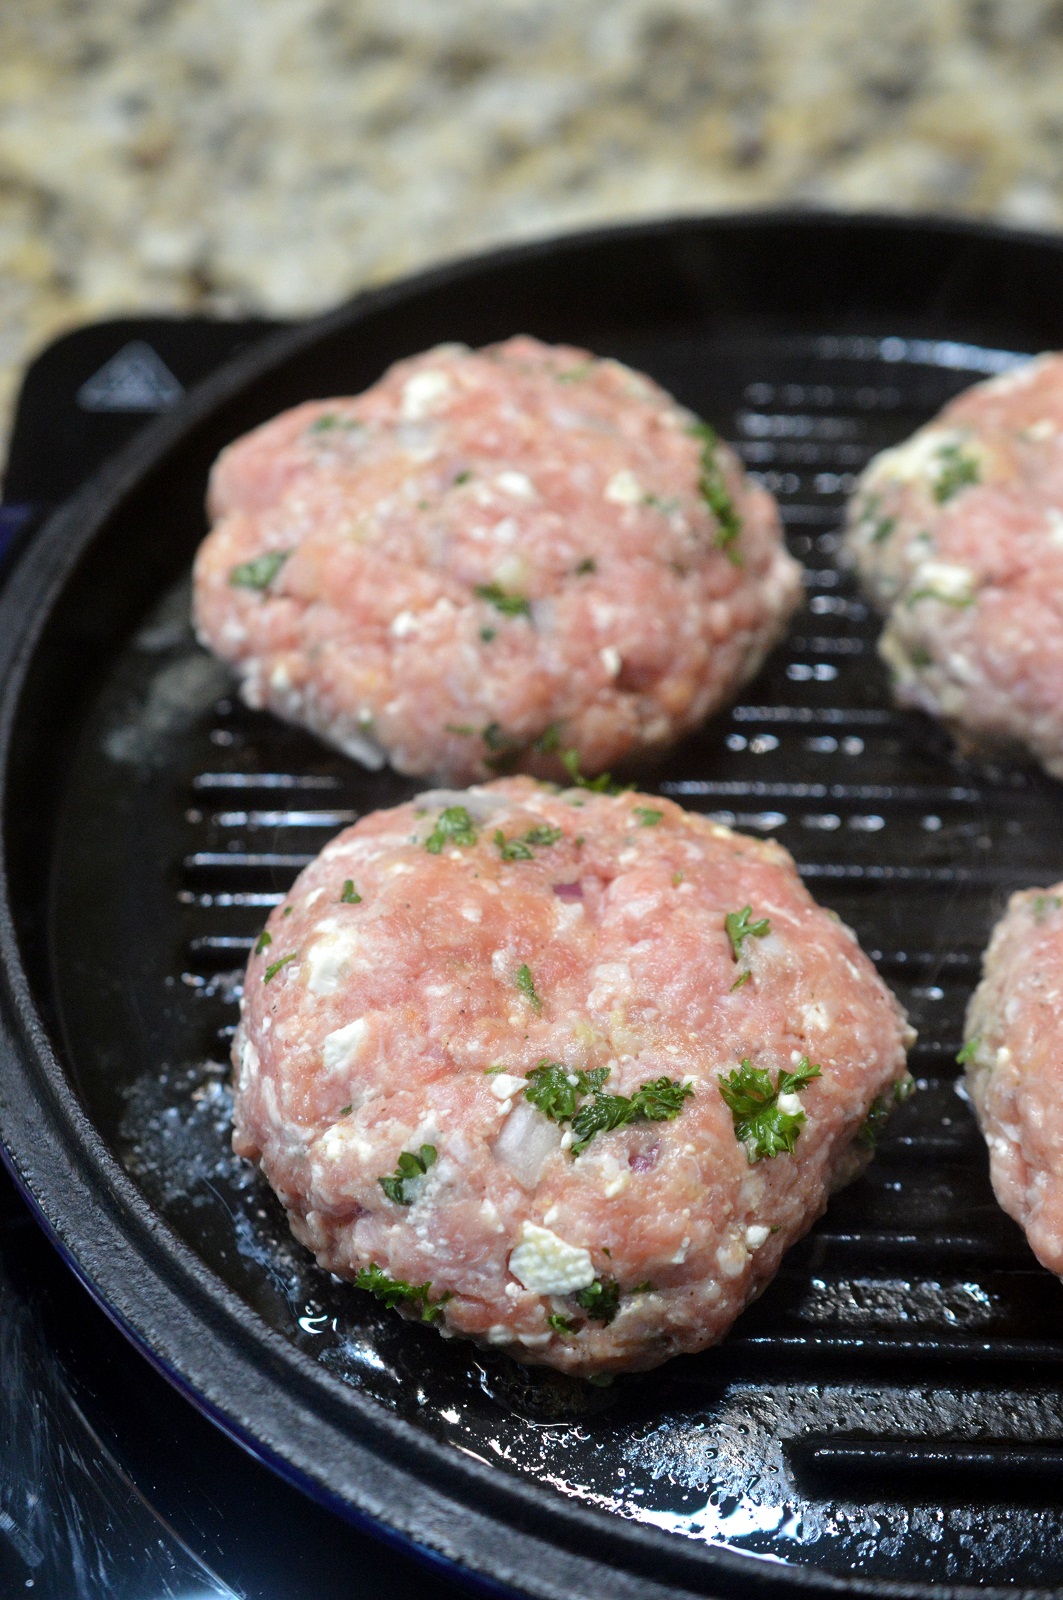 How to make a veal burger